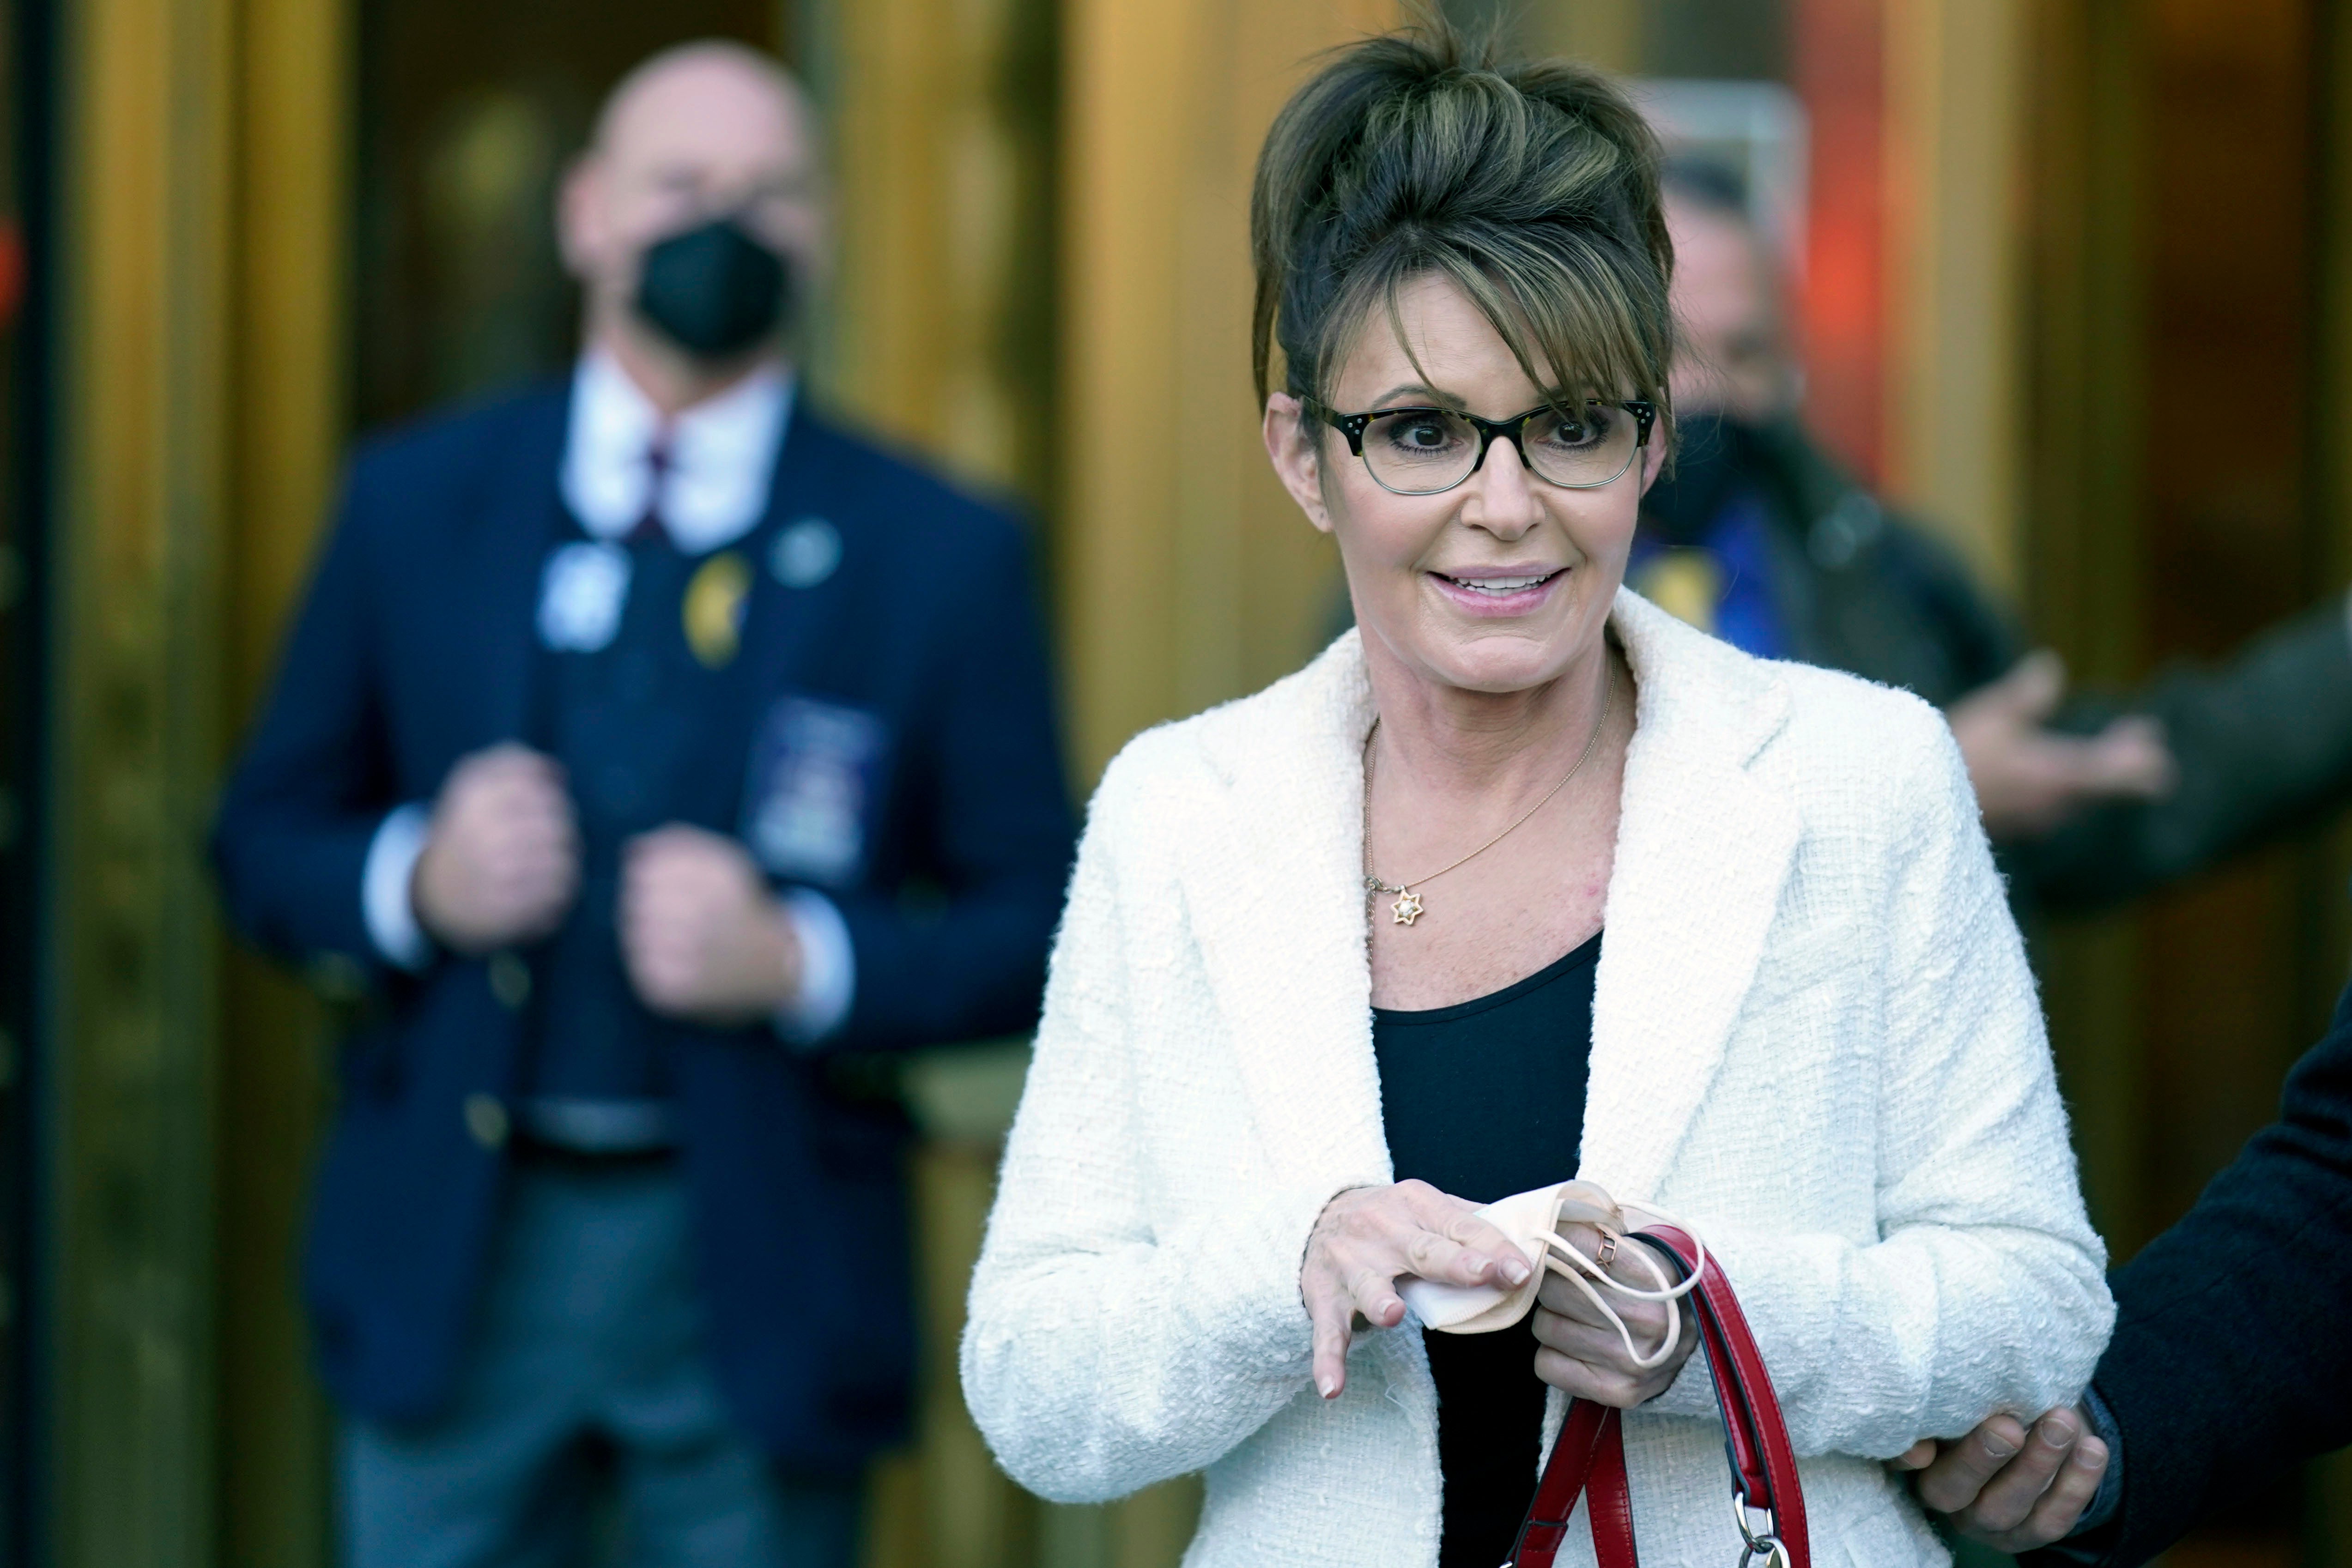 Sarah Palin leaves US District Court in Manhattan on 10 February after testifying in her libel case against The New York Times.